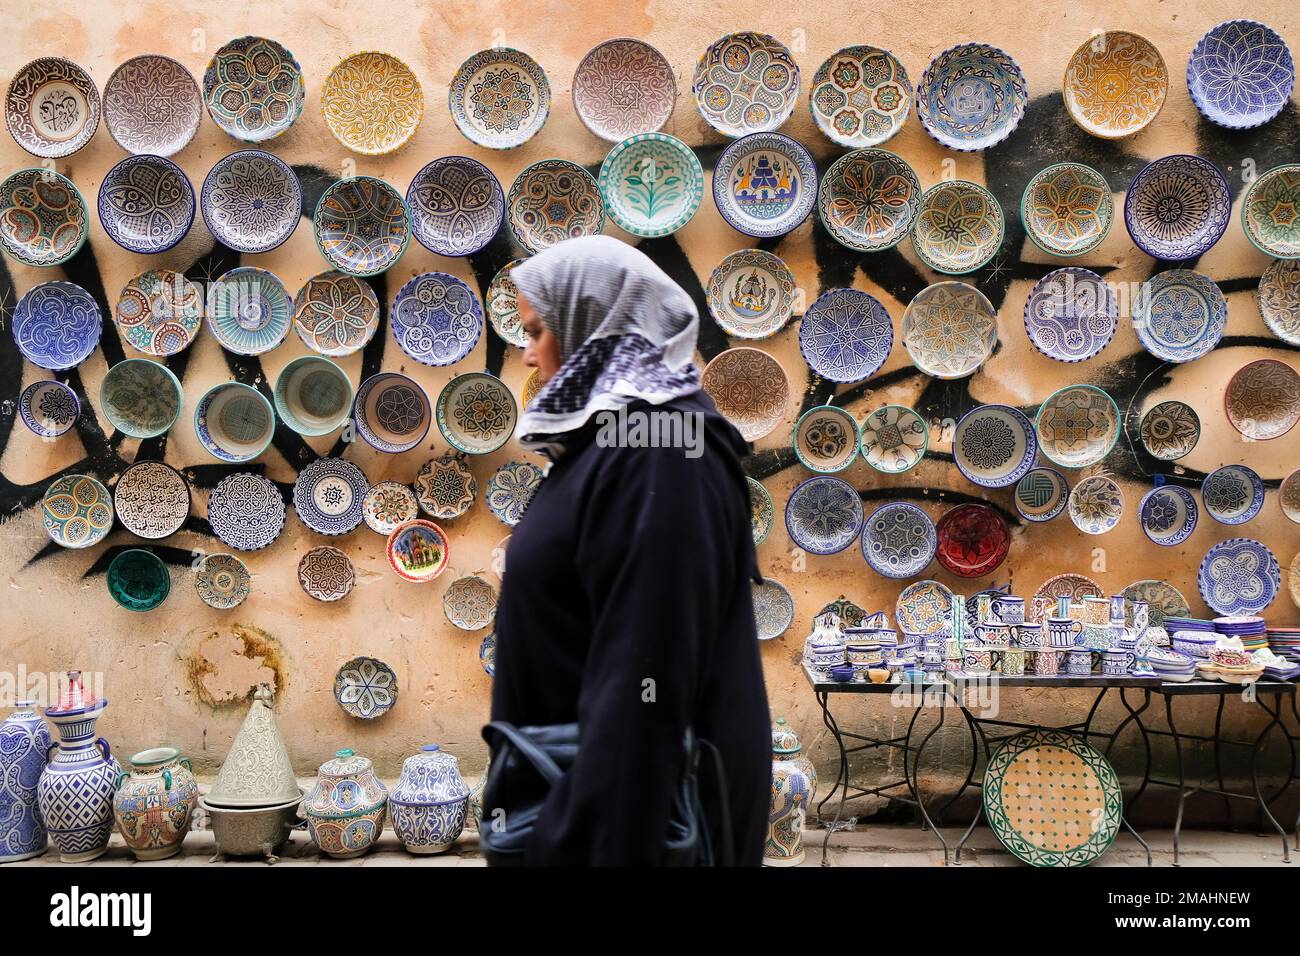 Fez, Morocco - blurry image of covered local muslim woman walking past ceramic goods for sale in Fes el Bali market. Horizontal Fes Travel background. Stock Photo